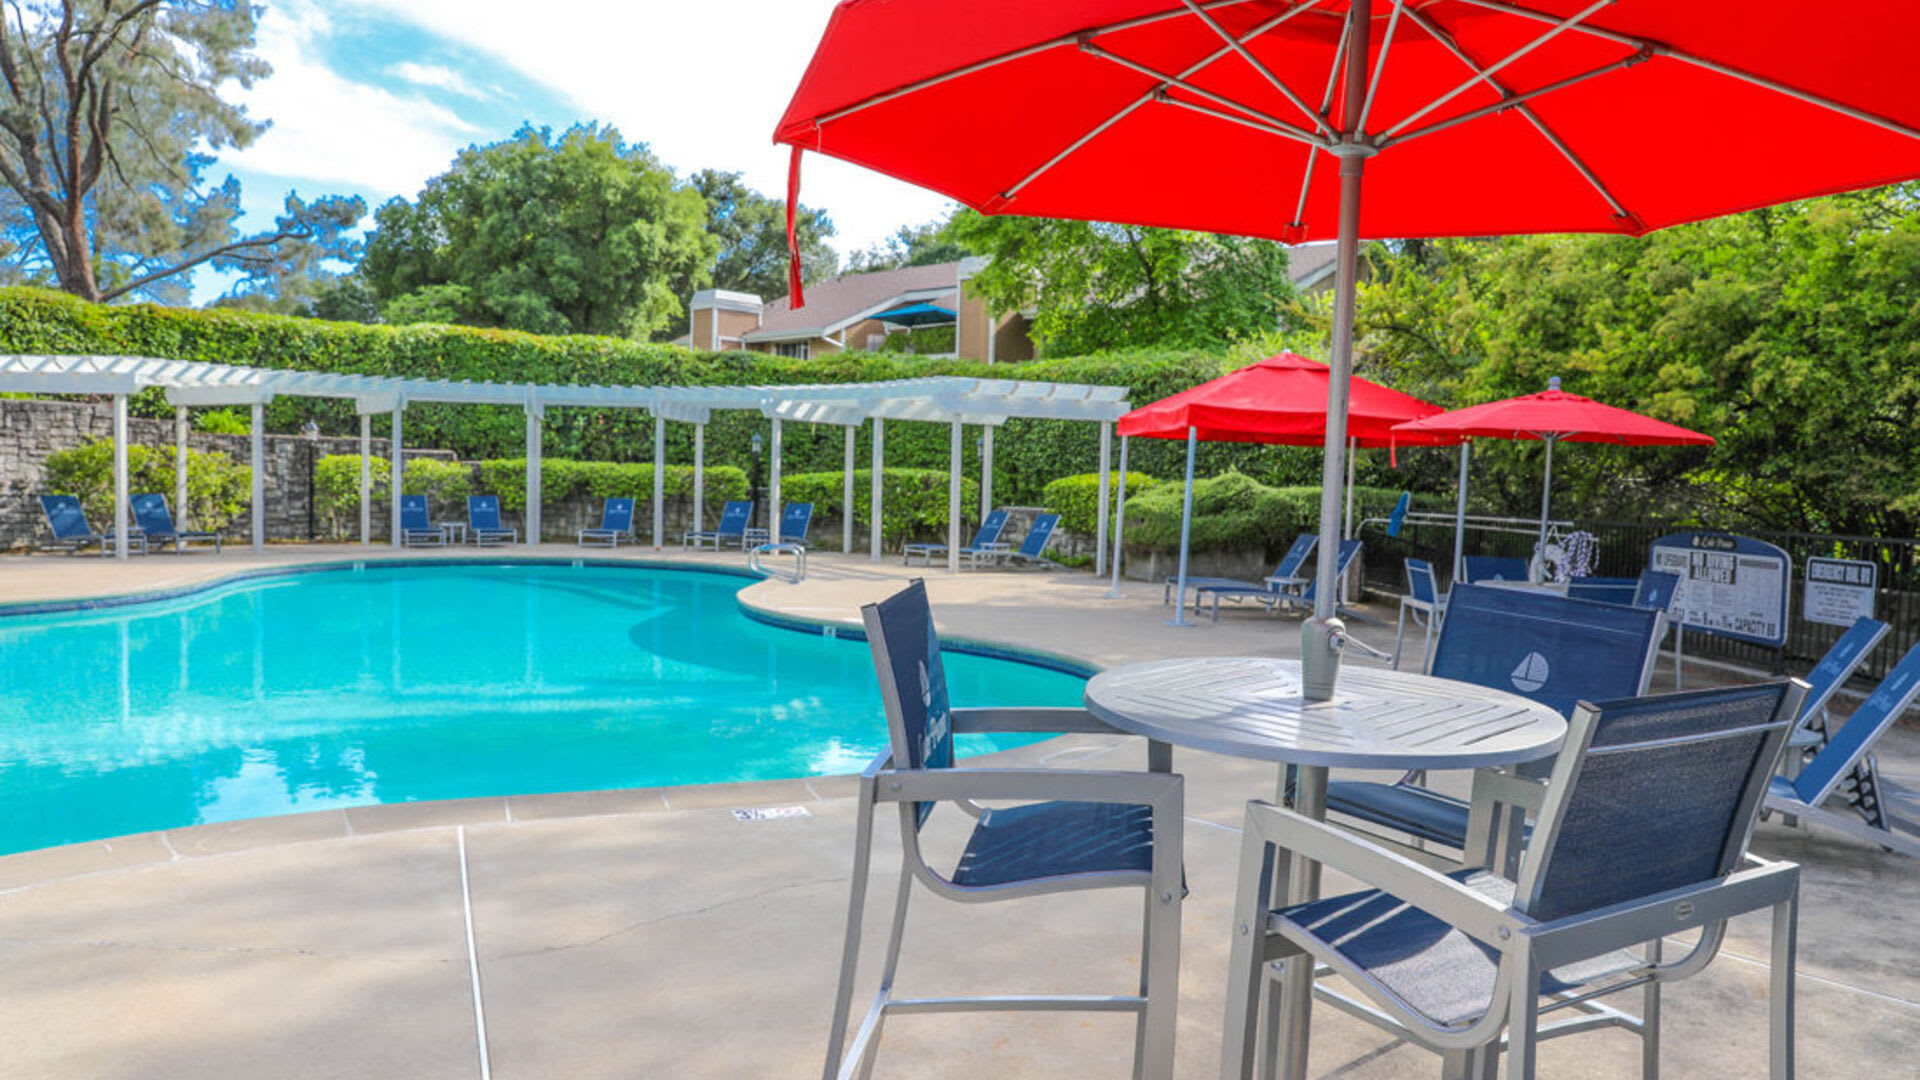 Swimming pool with umbrellas at Lake Pointe Apartments in Folsom, California